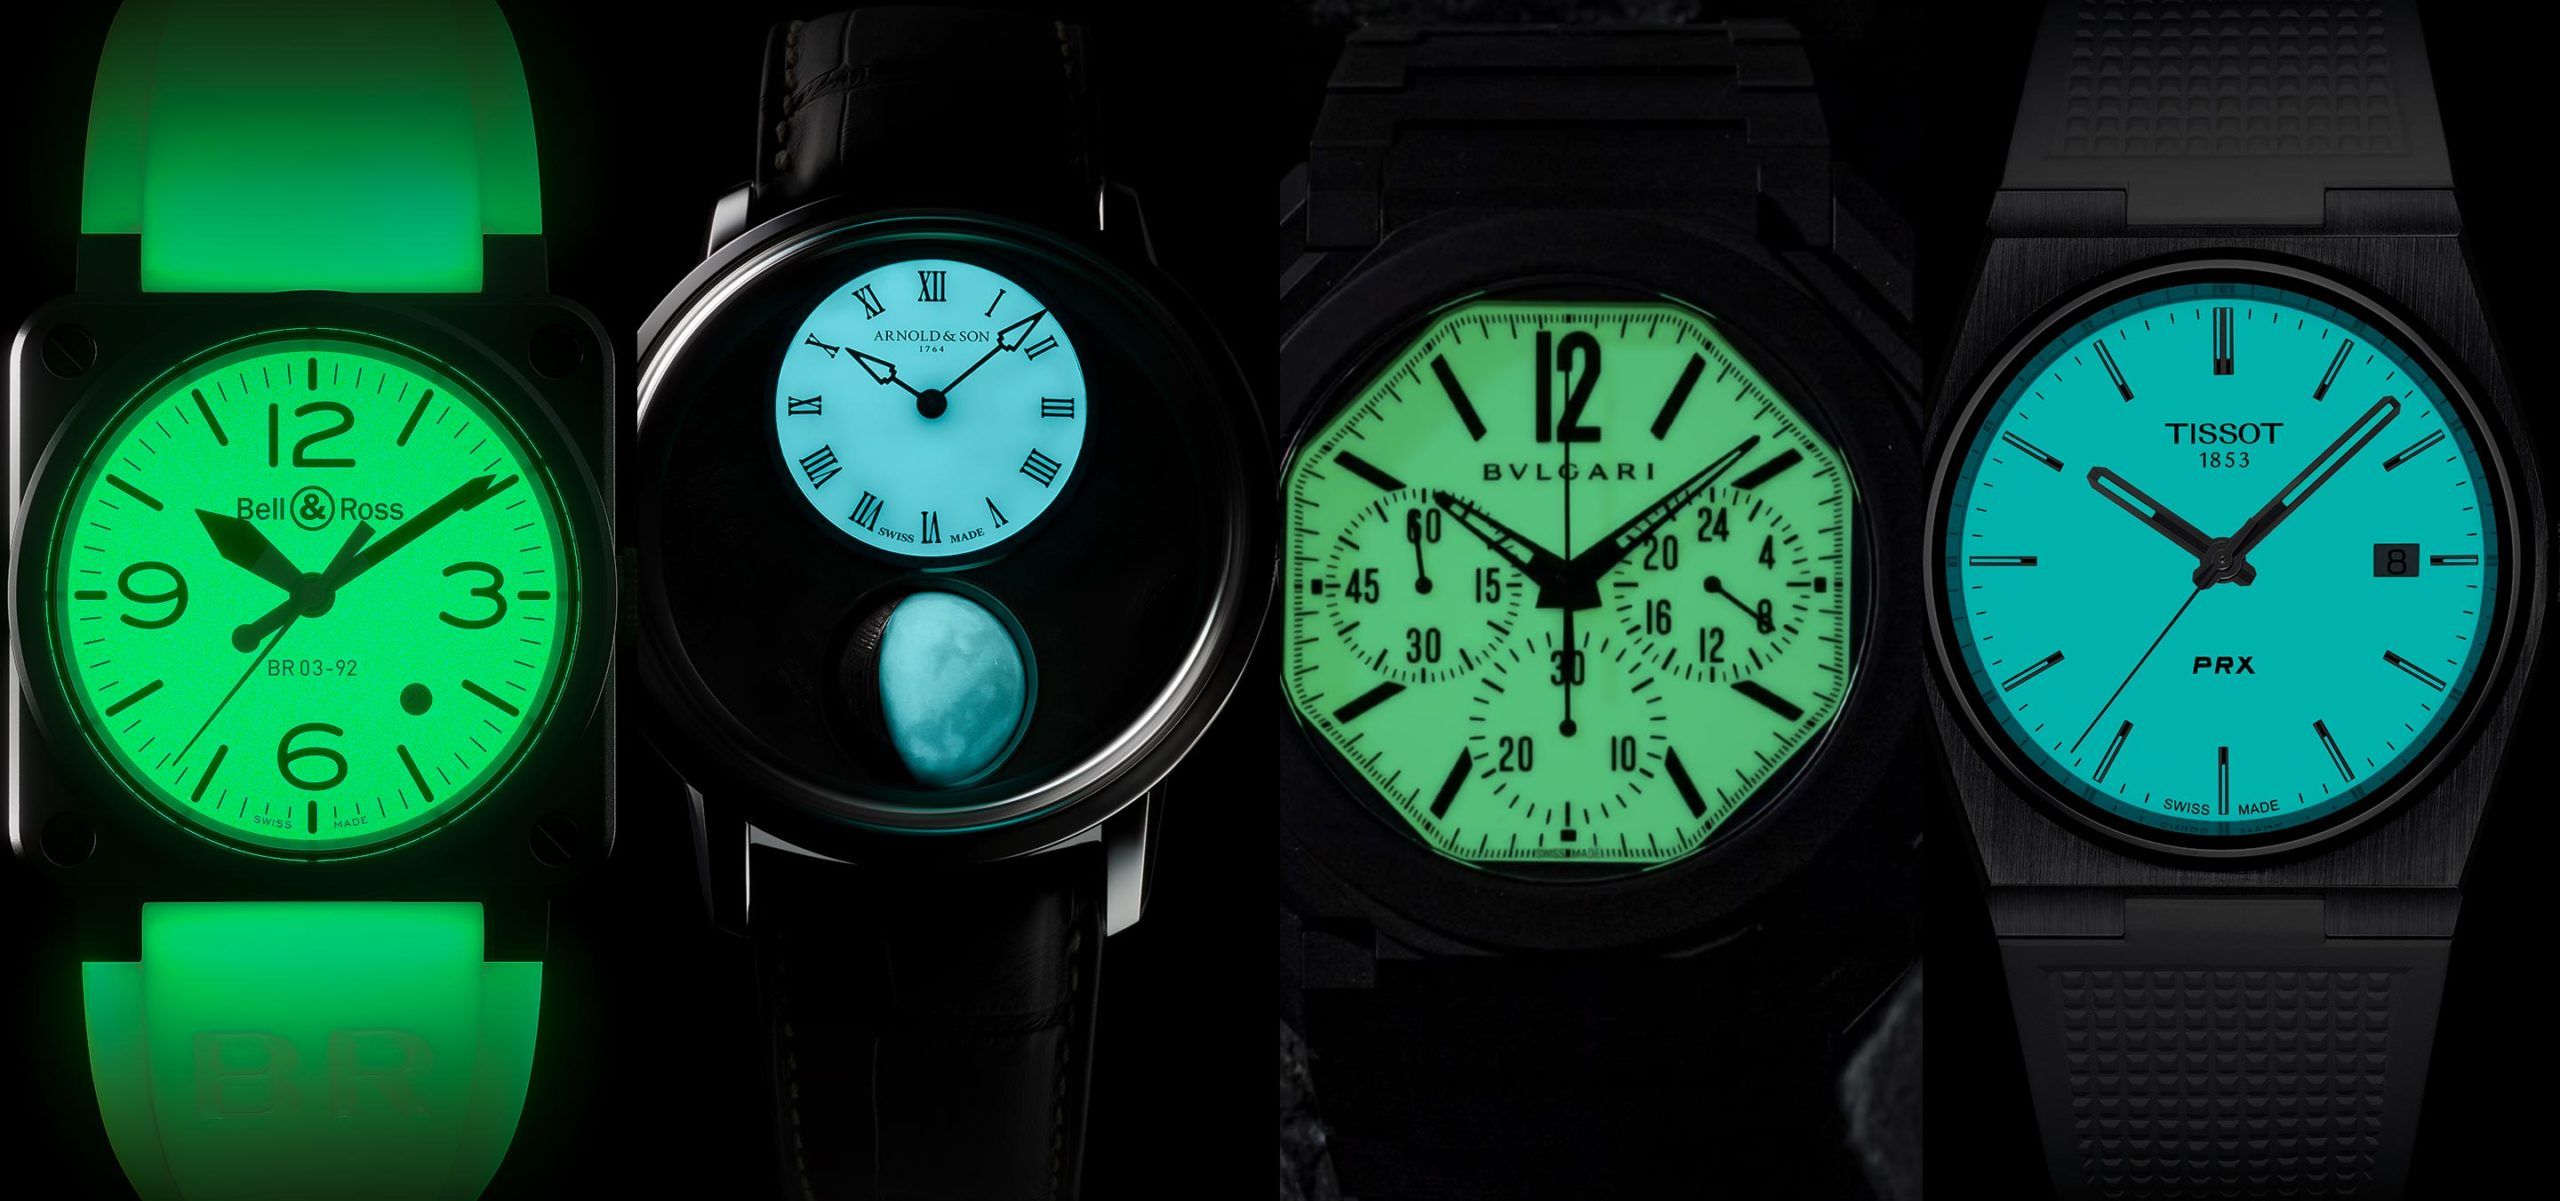 Let There Be Lume: Presenting Luminous Watches That Light Up The Festival Of Lights